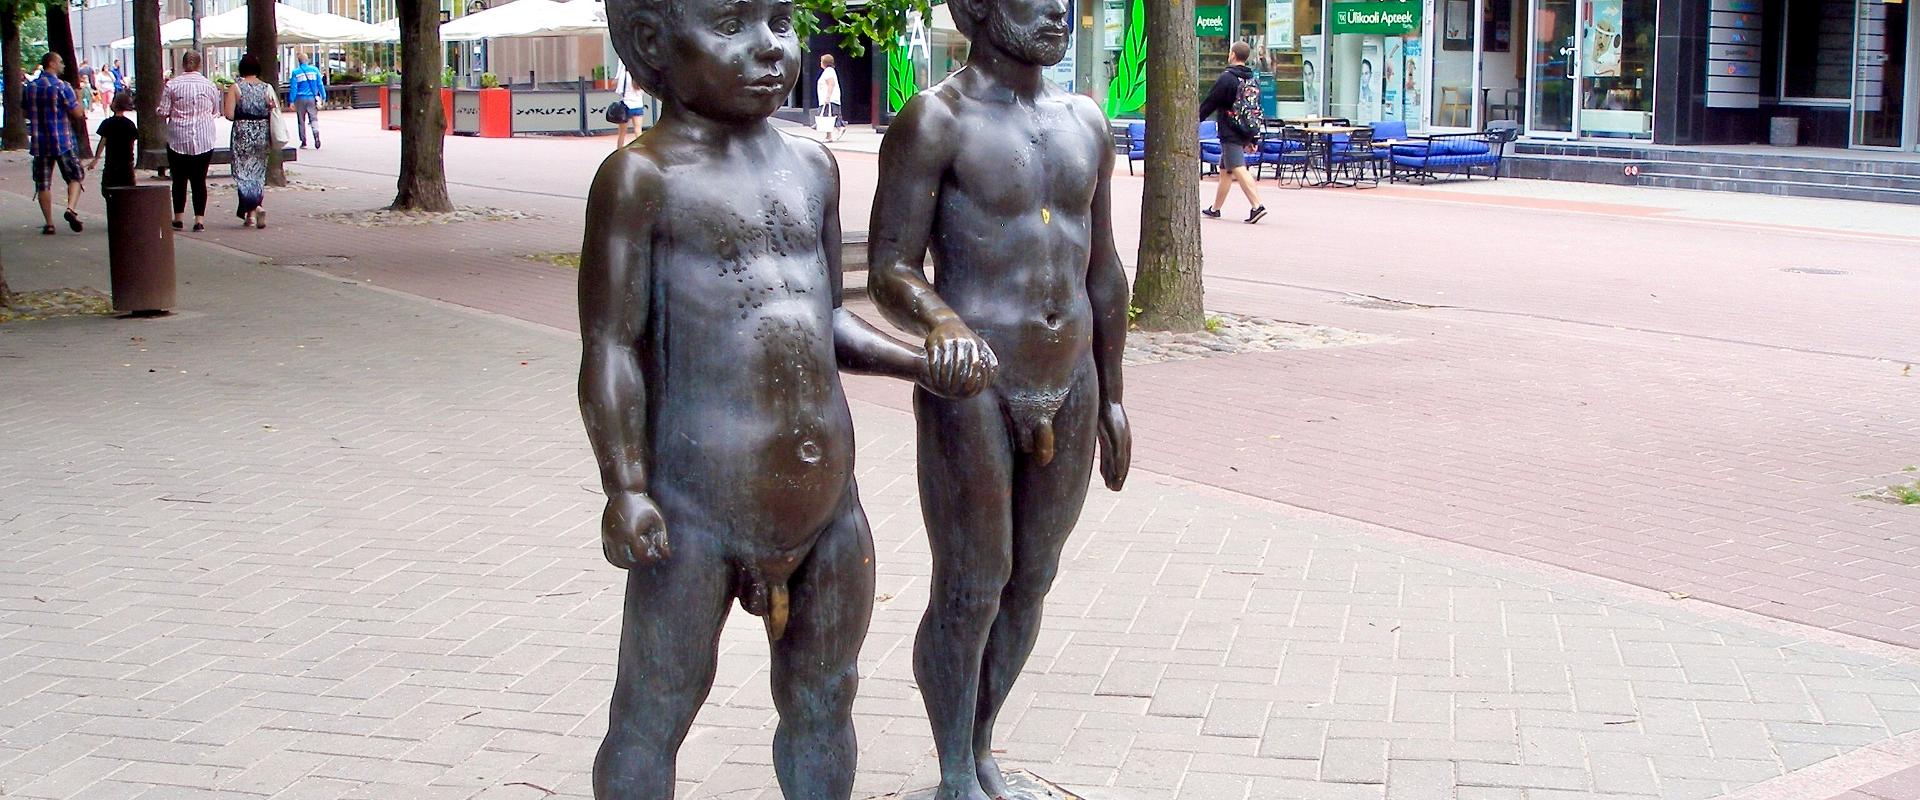 'Father and Son' sculpture